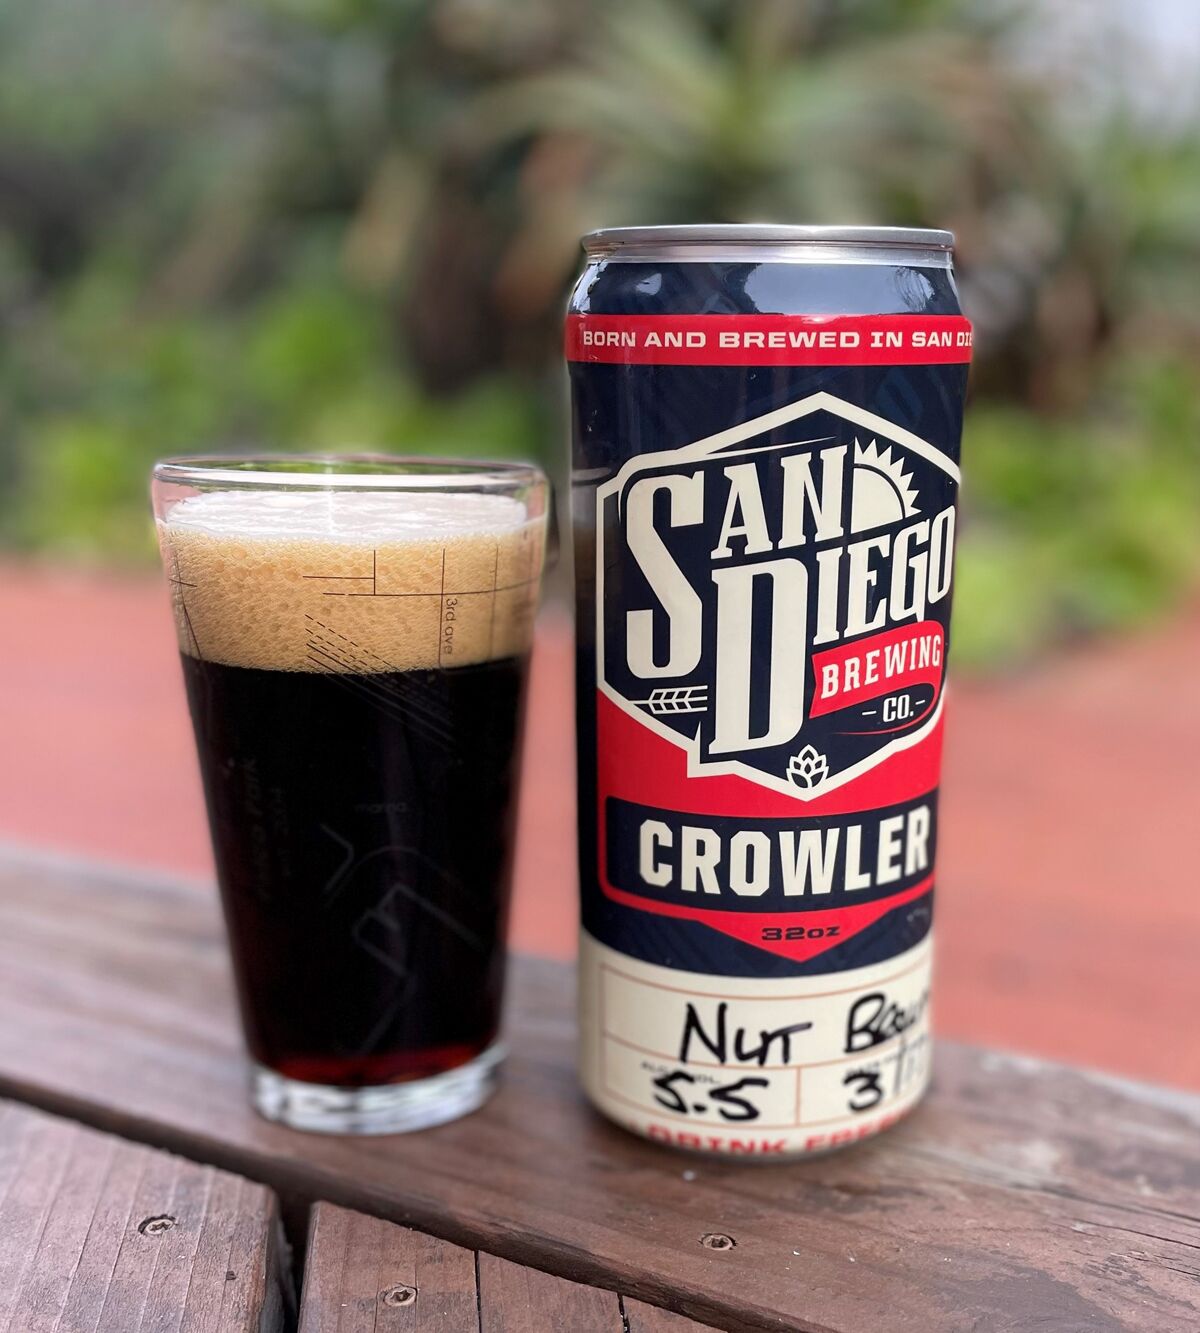 San Diego Brewing Company's Old Town Nut Brown ale.